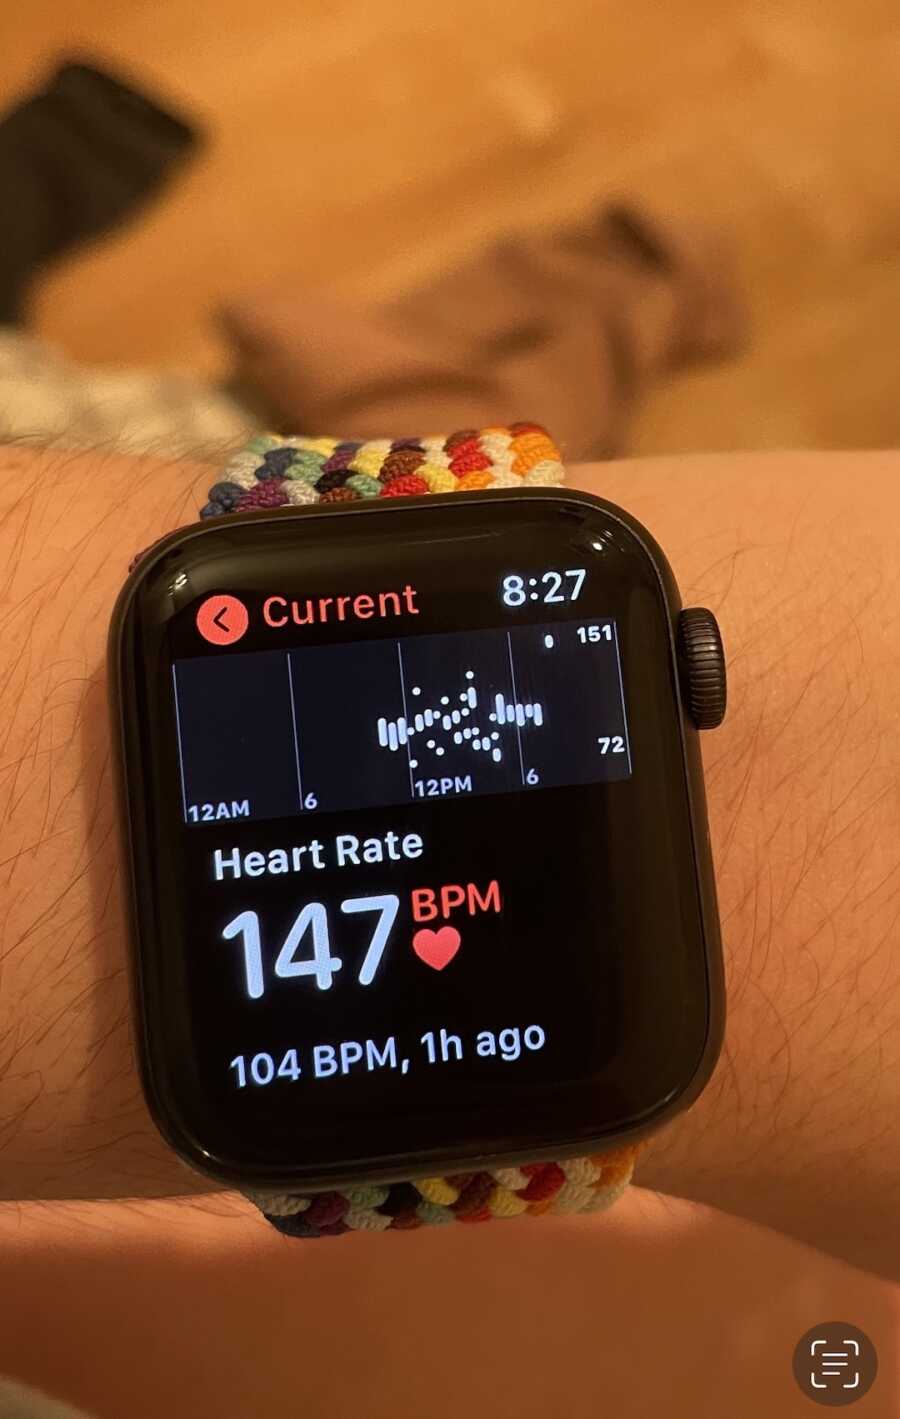 chronically ill woman's Apple watch displaying a high heart rate